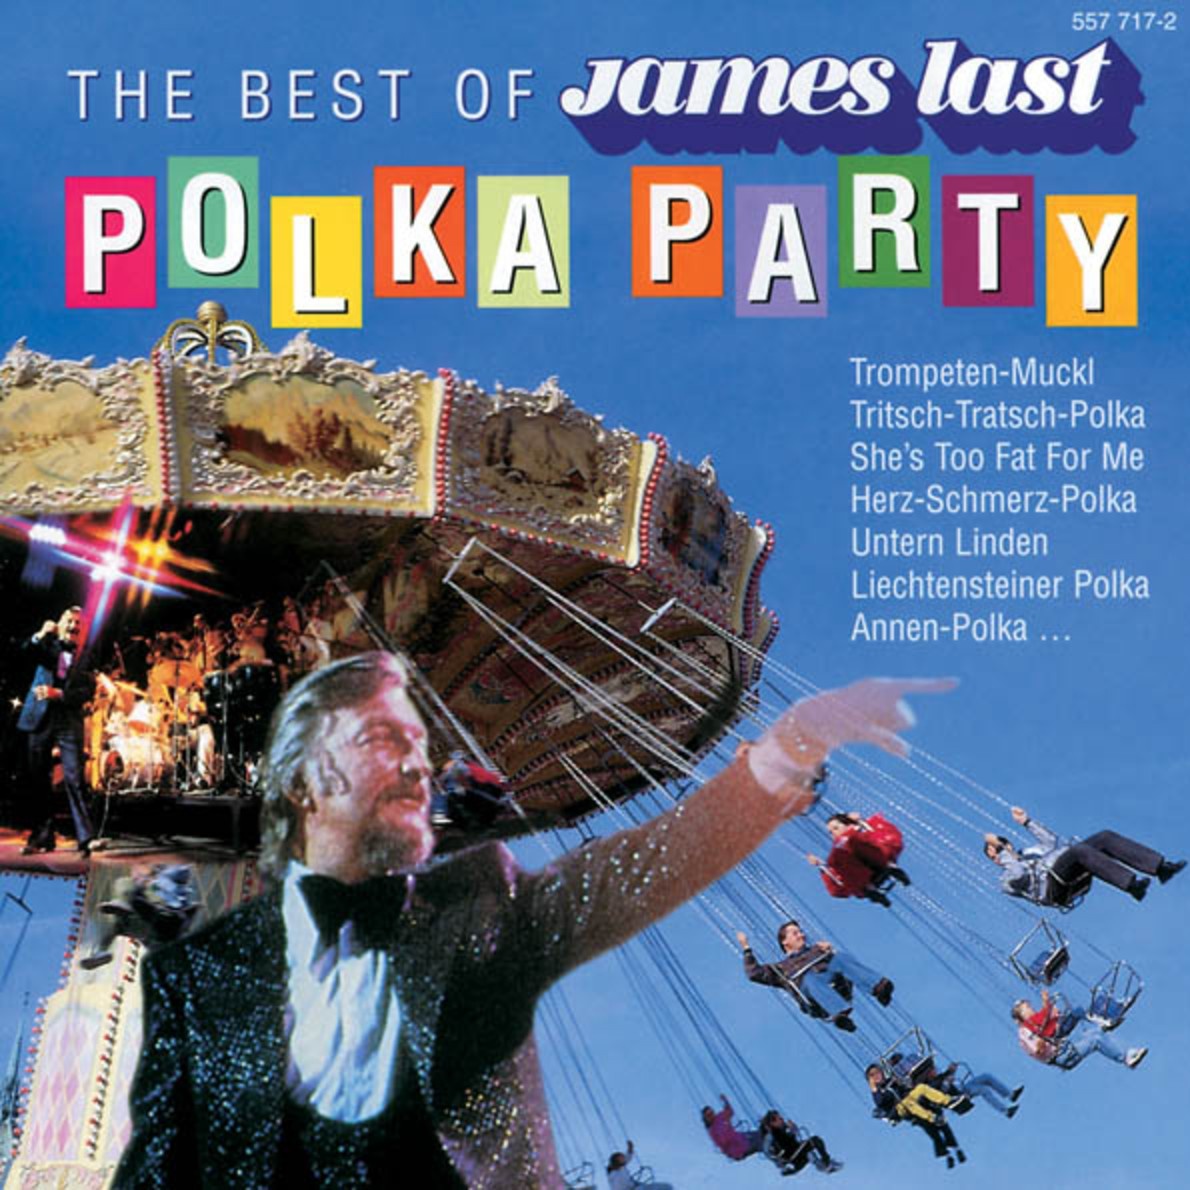 The Best of Polka Party